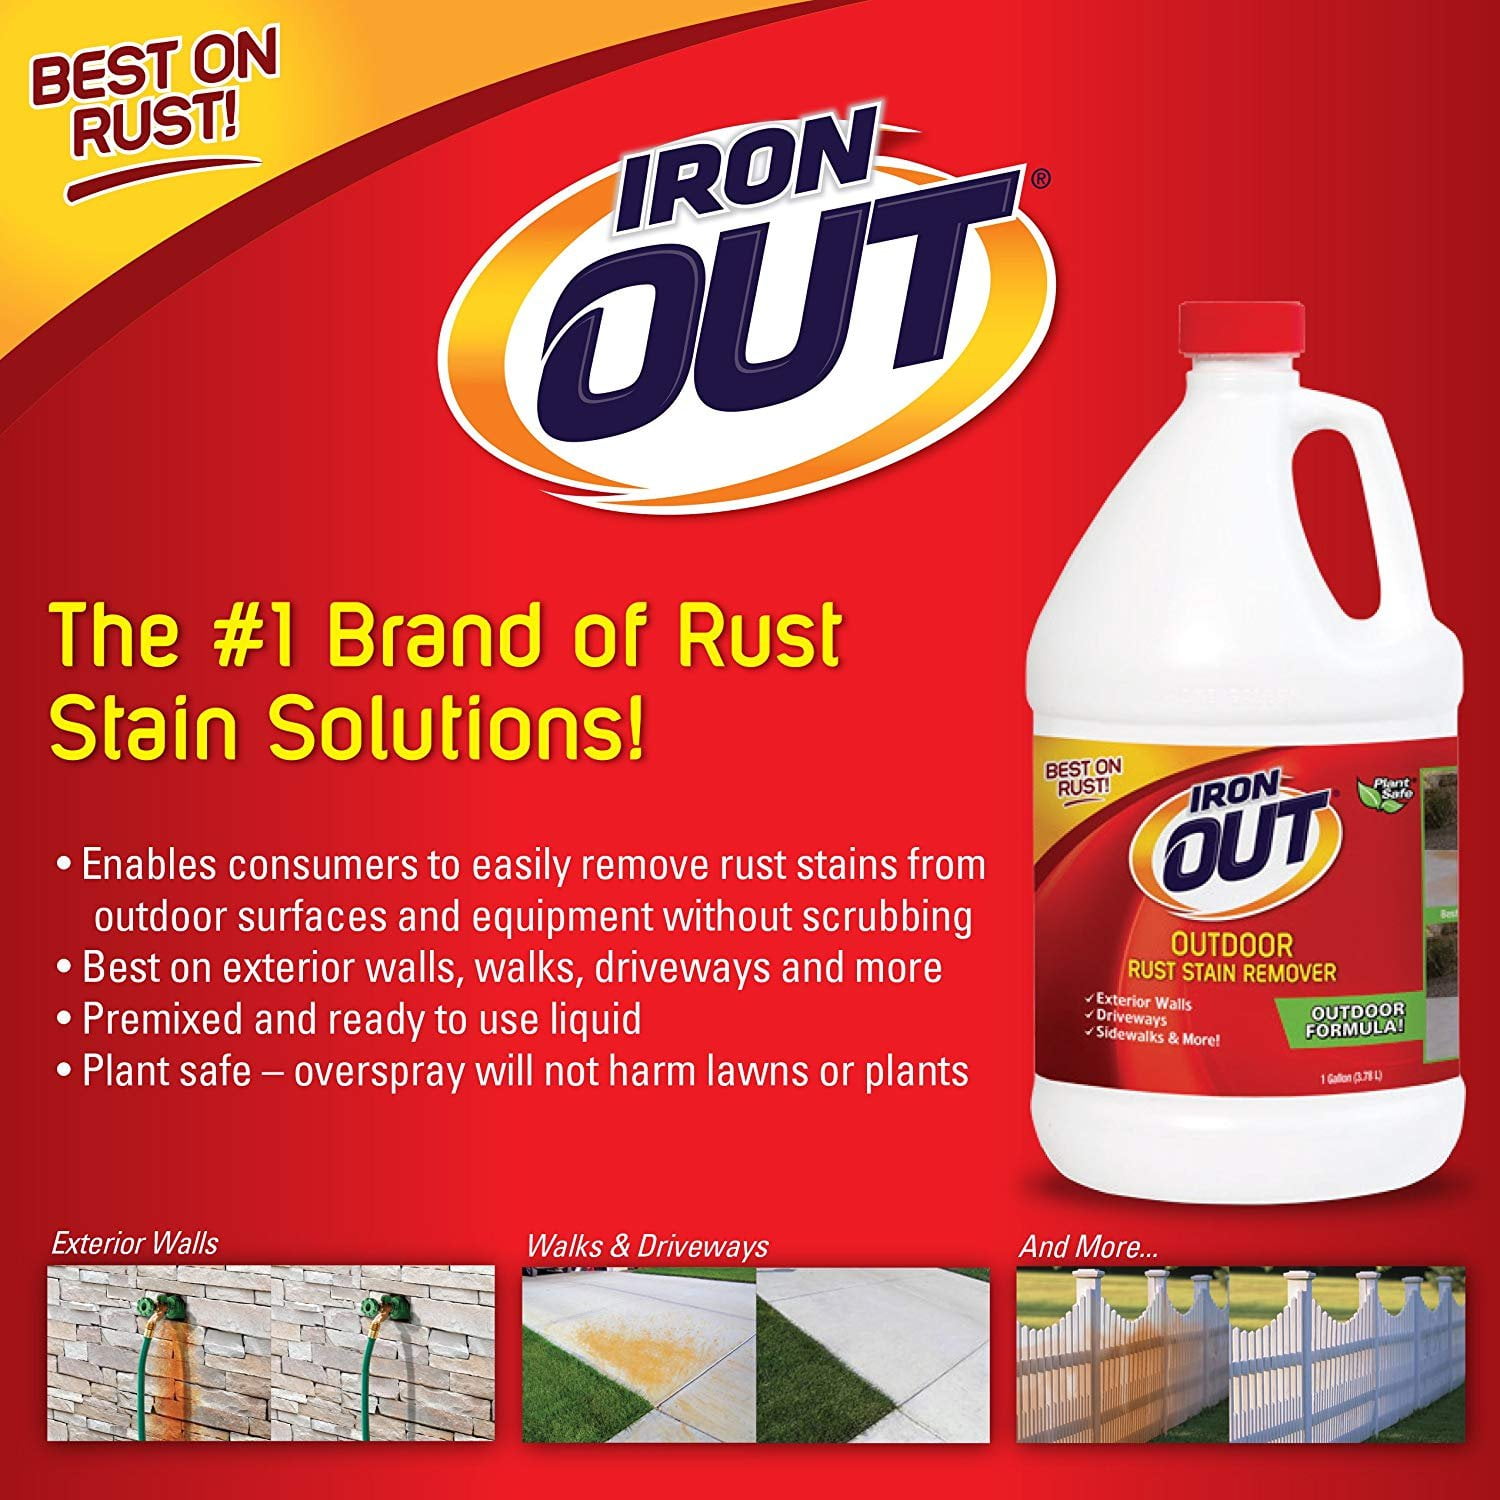 Iron OUT Outdoor Rust Stain Remover, 1 Gallon 